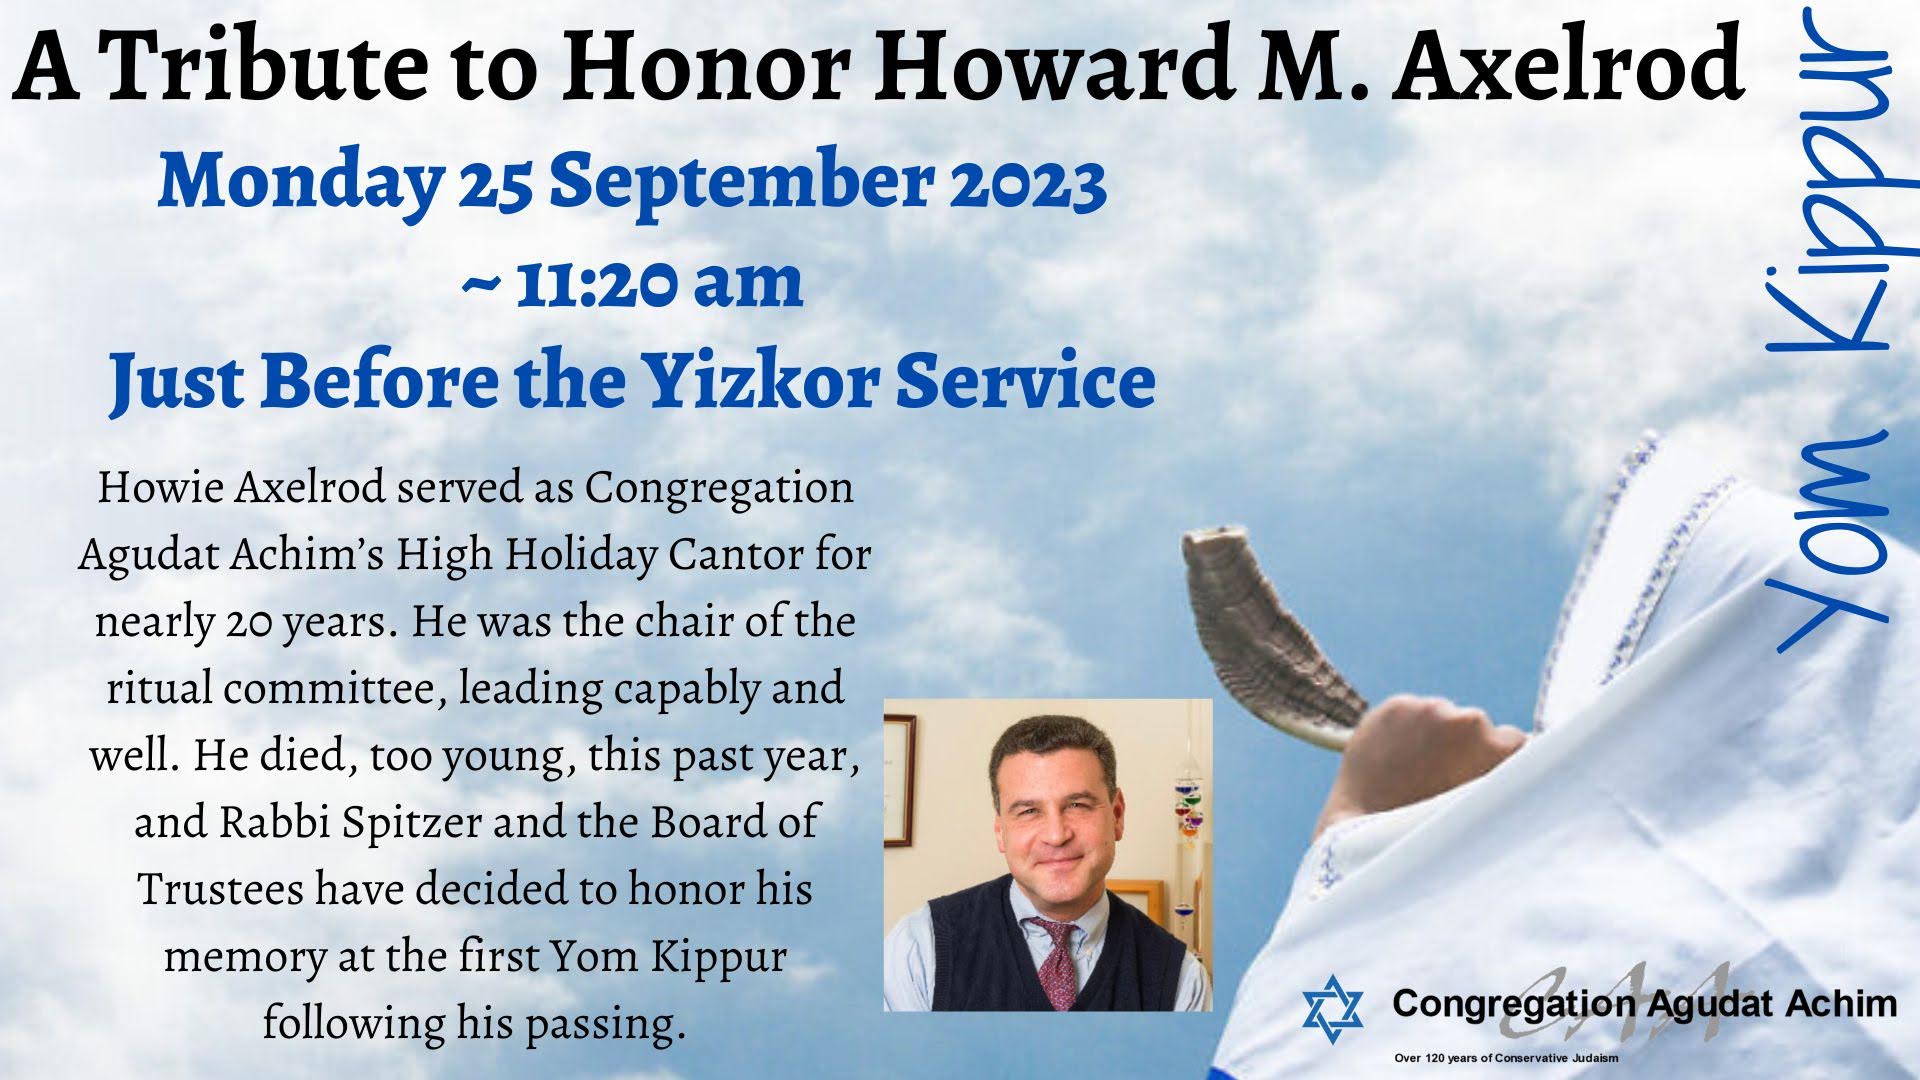 A Tribute to Honor Howard M. Axelrod